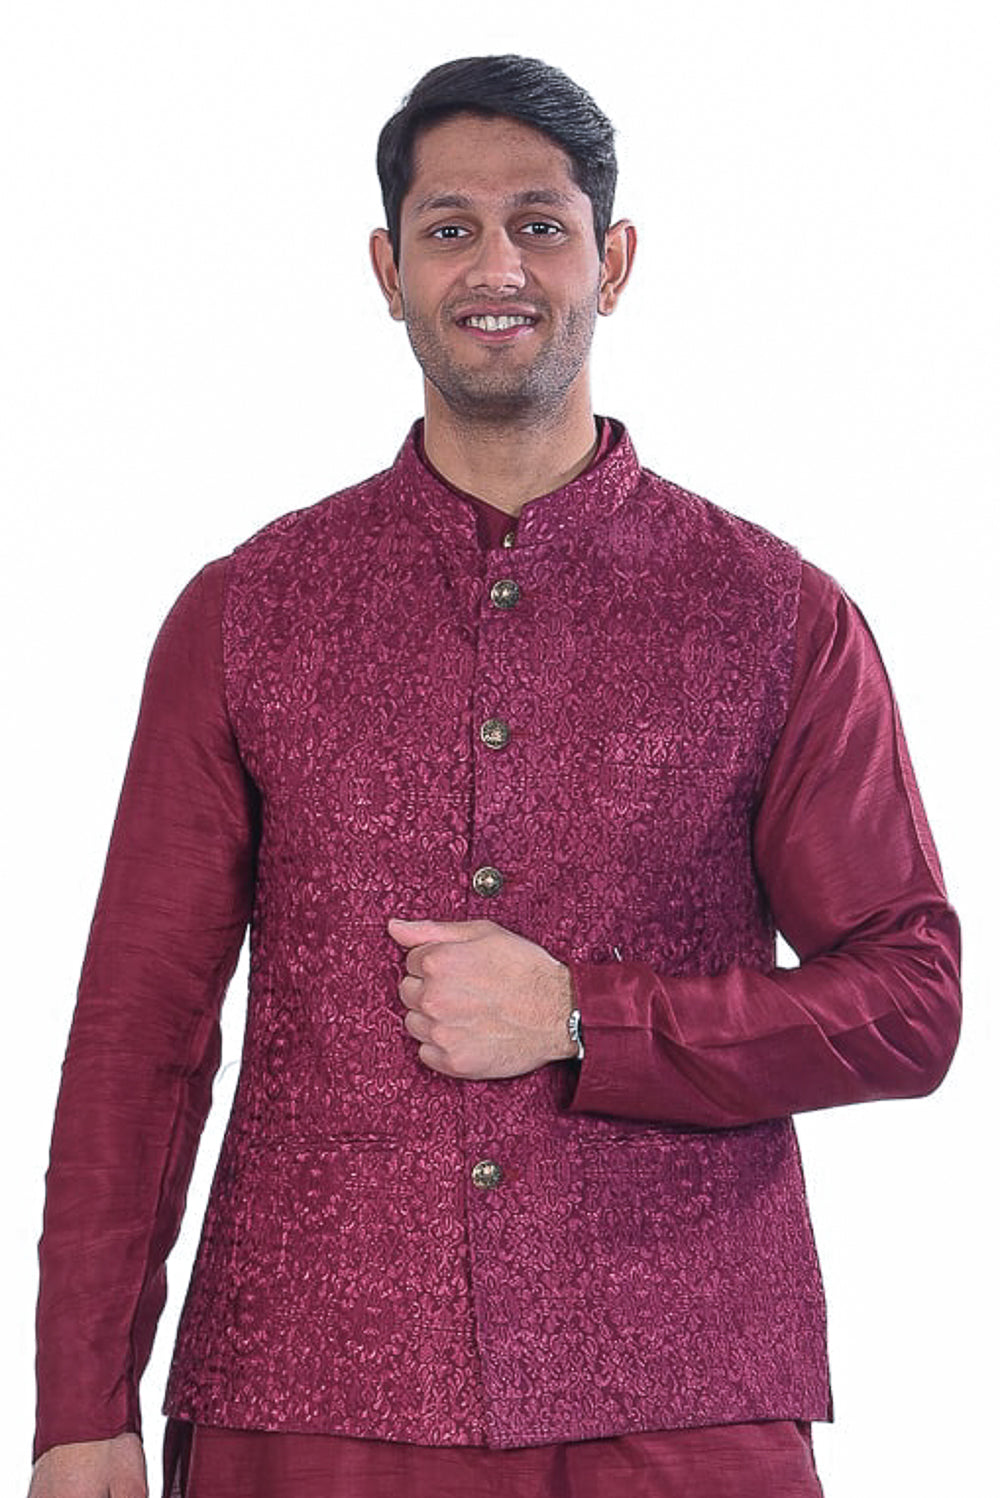 Wine Koti Jacket Set with Embroidered Motifs